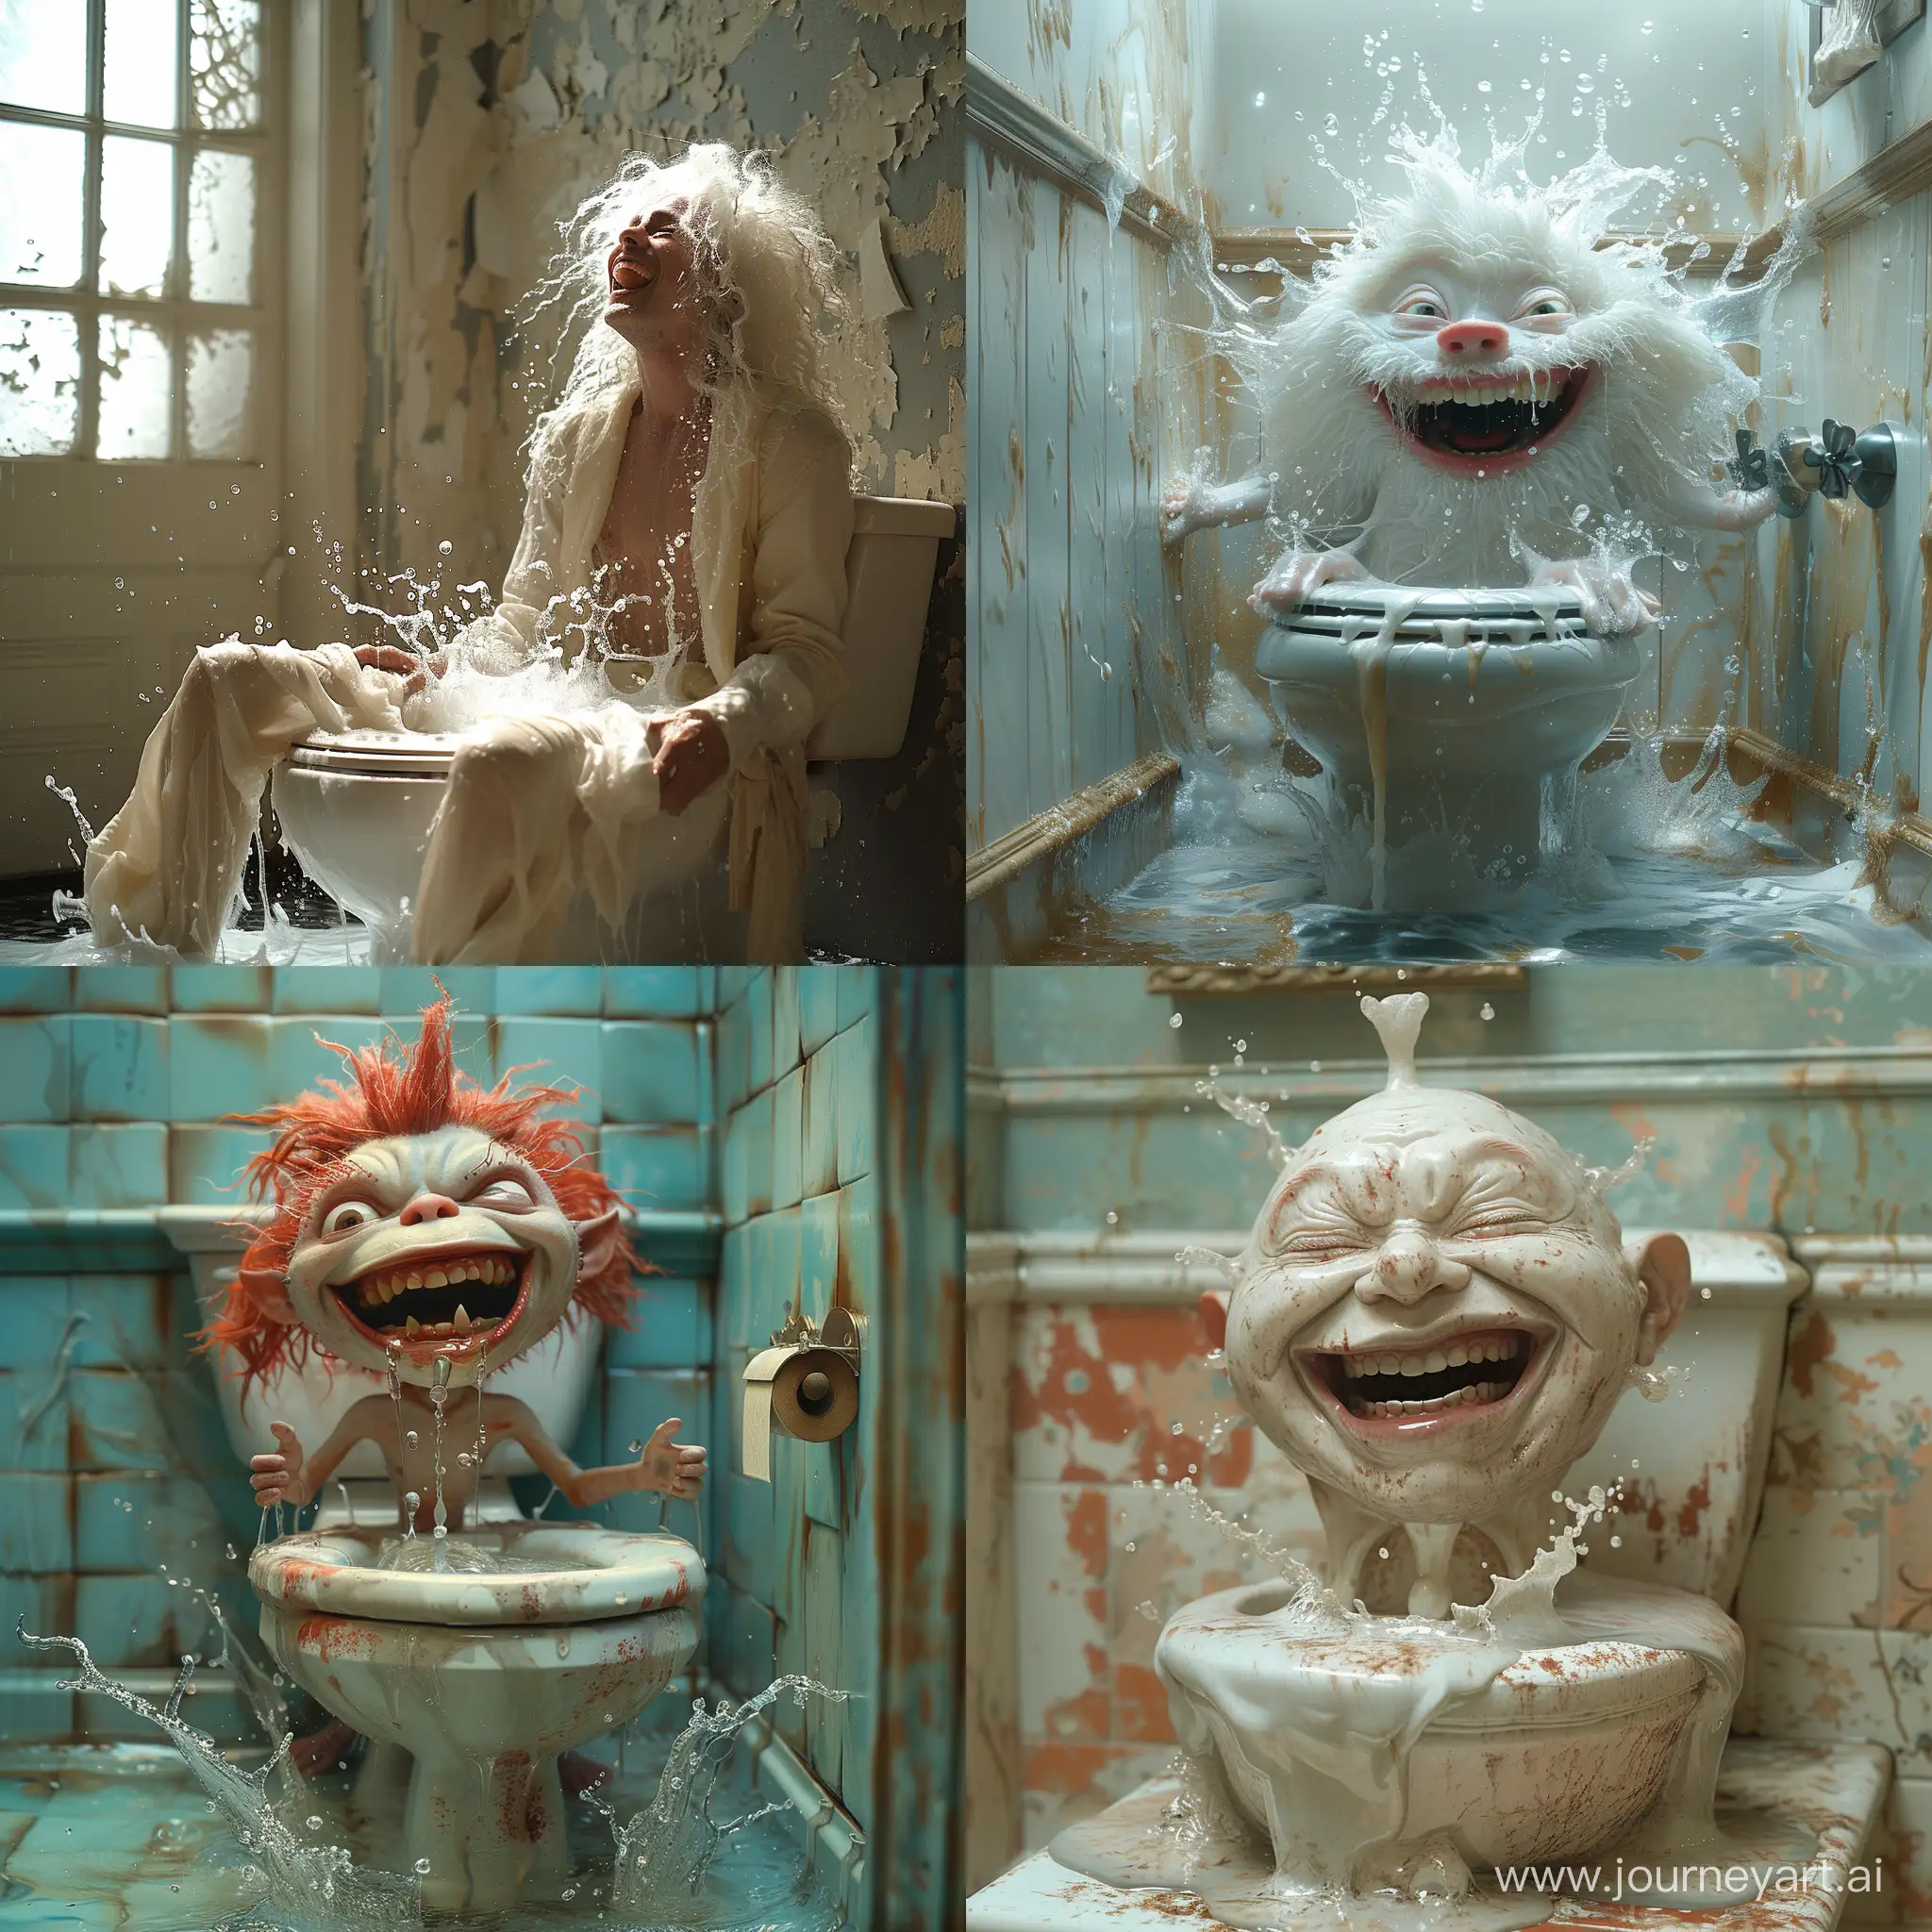 Eccentric-Drunk-Witch-Enjoying-Hilarious-Toilet-Time-with-Water-Splashes